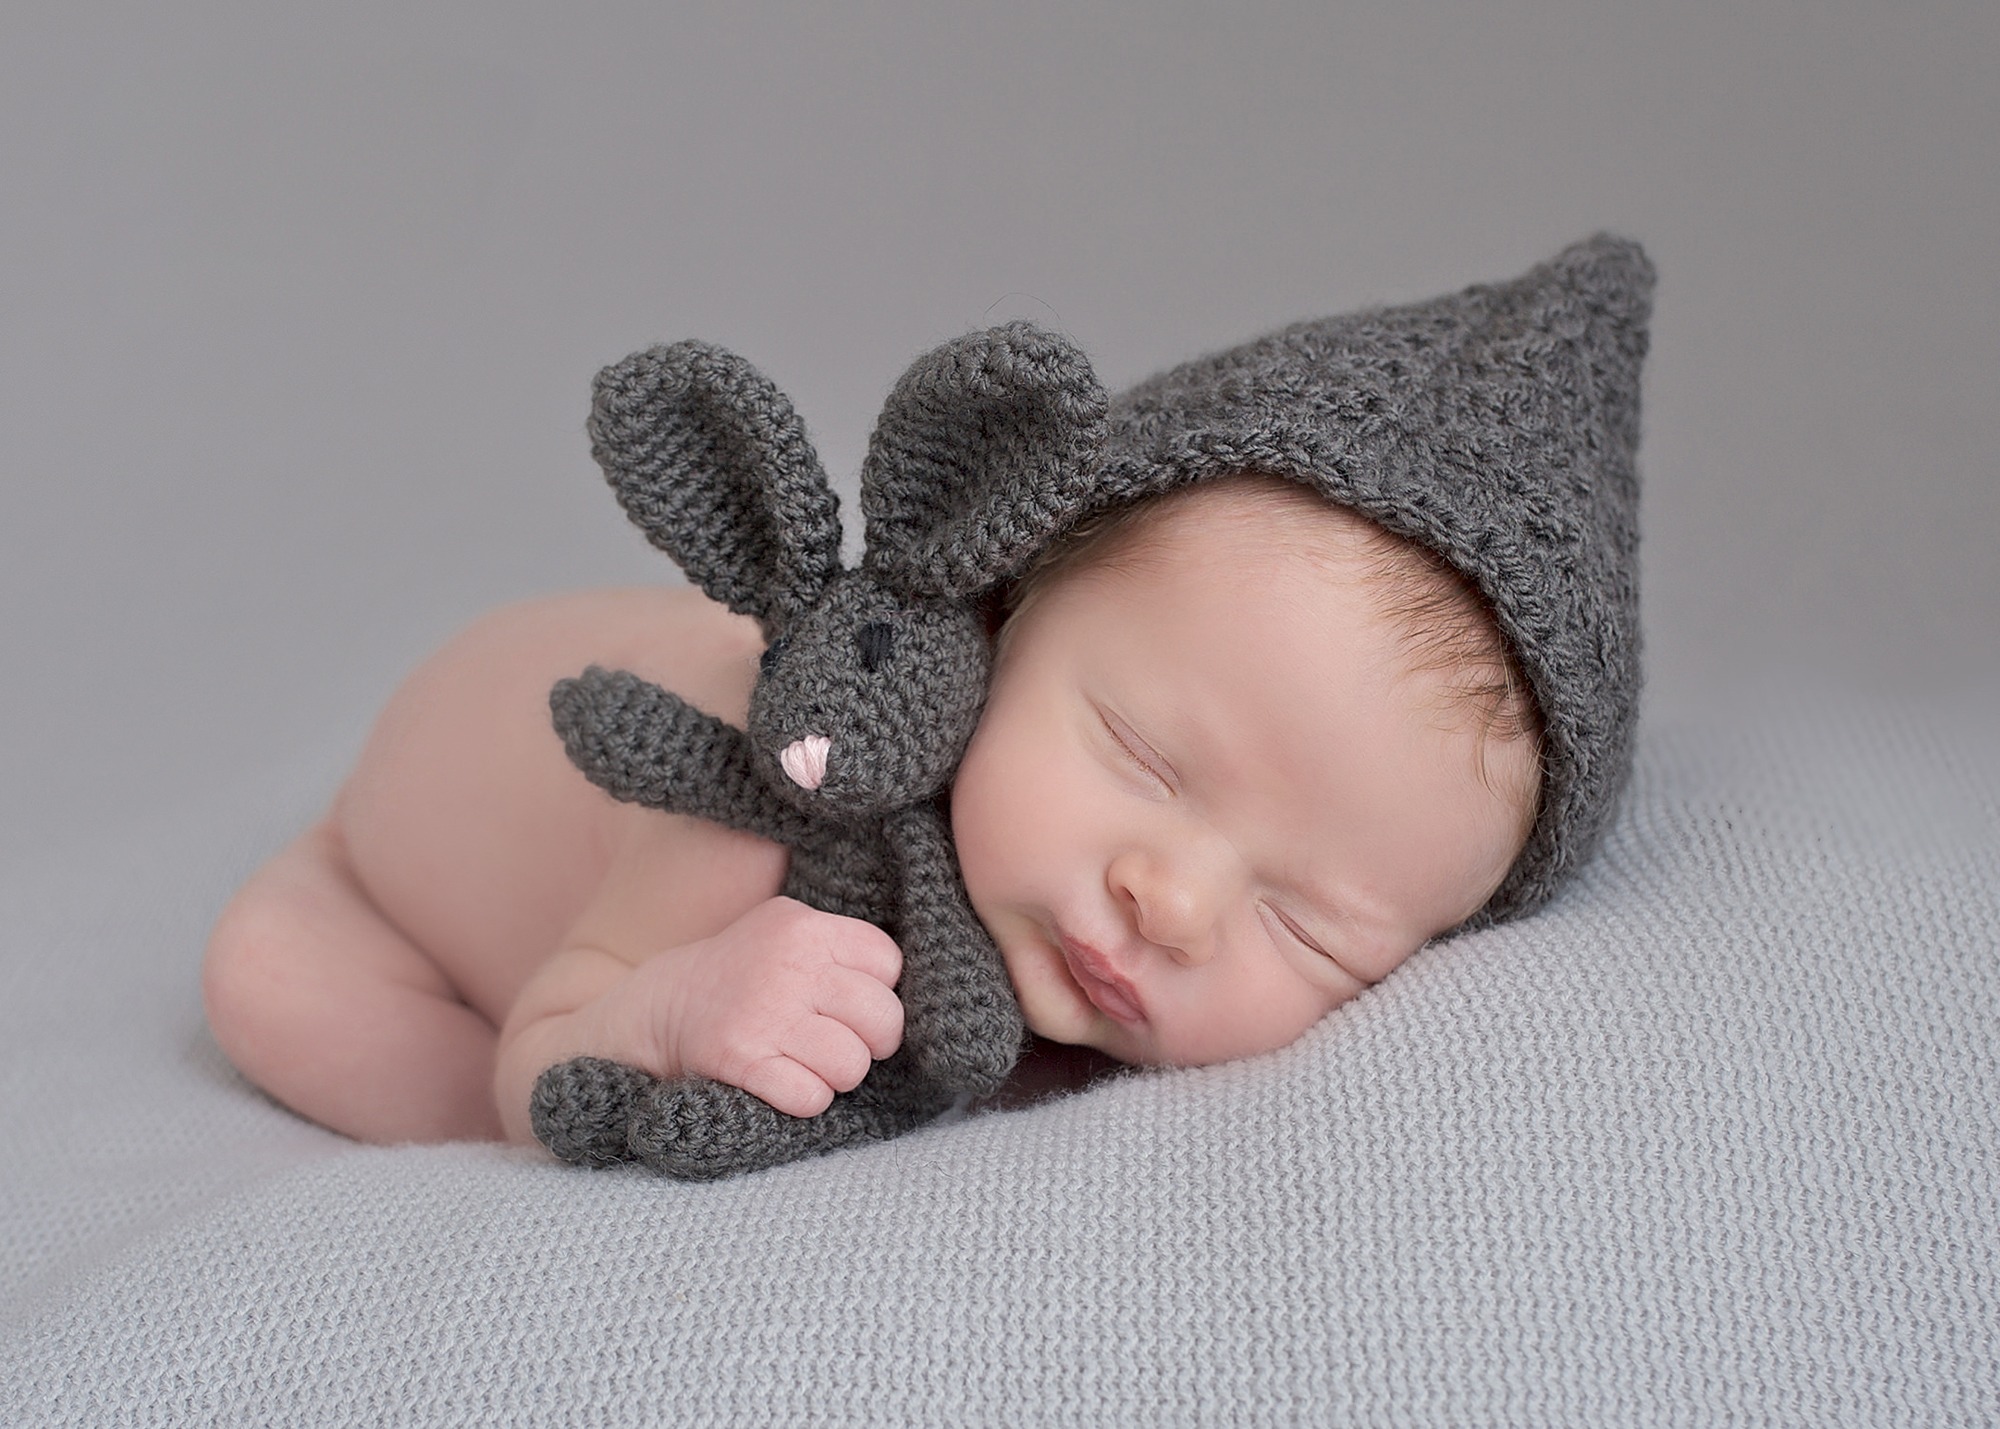 "cute newborn baby holding tiny soft rabbit, with hat on peacefully posed and sleeping"